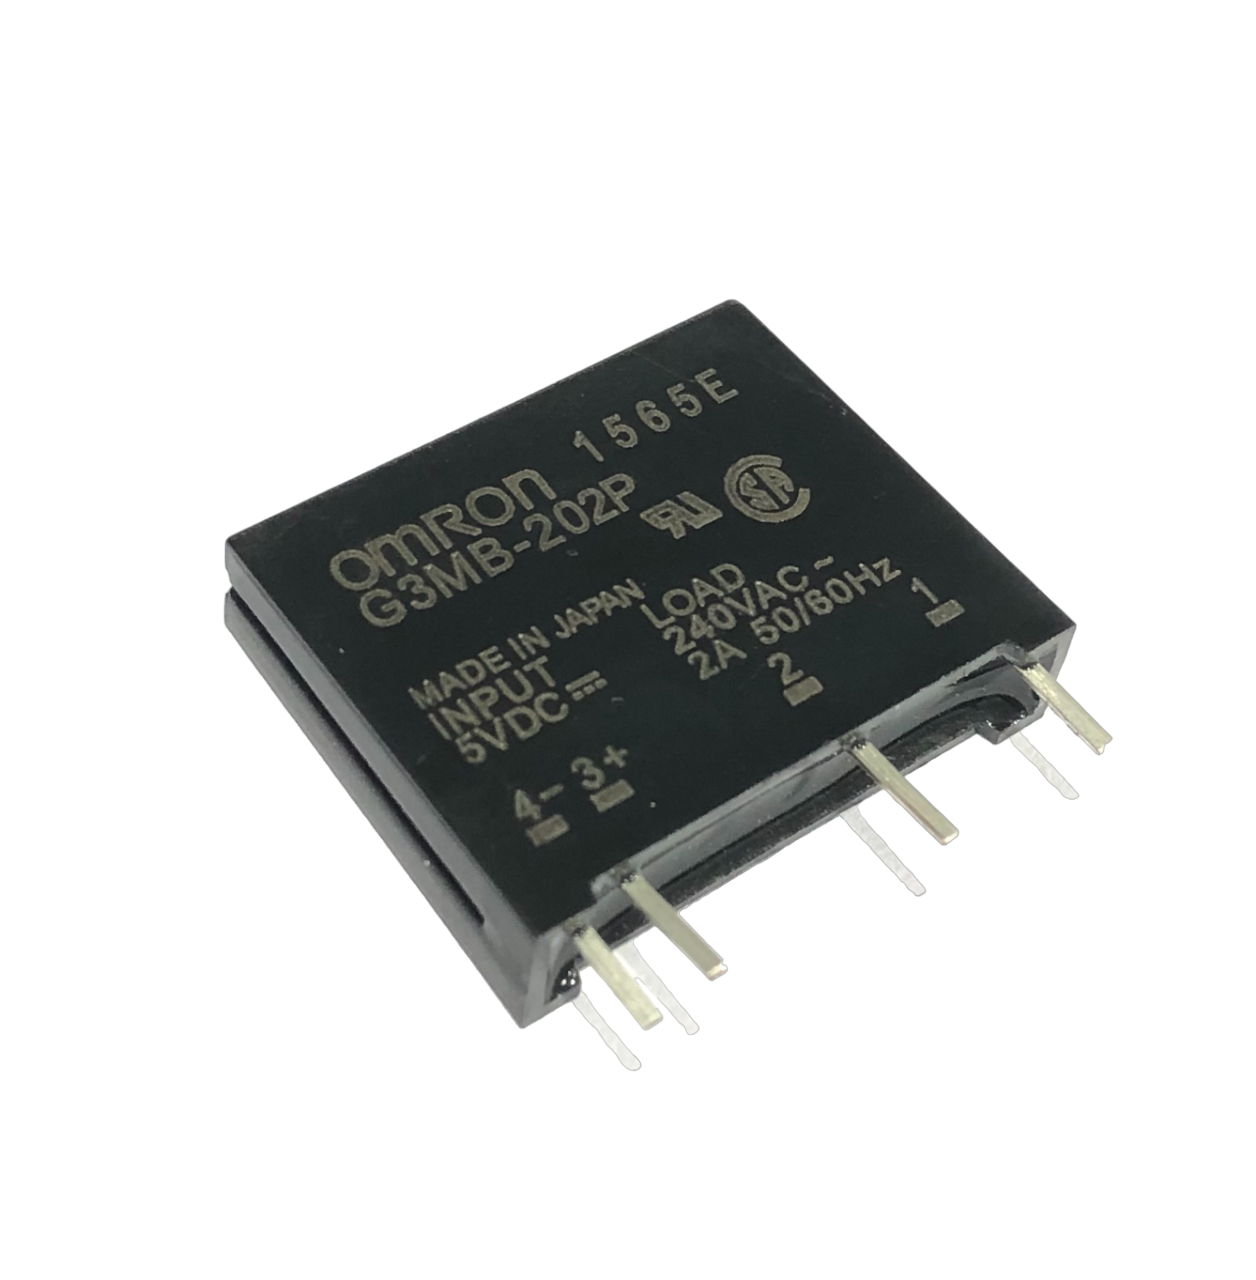 roboway solid state relay omron g3mb 202p 1